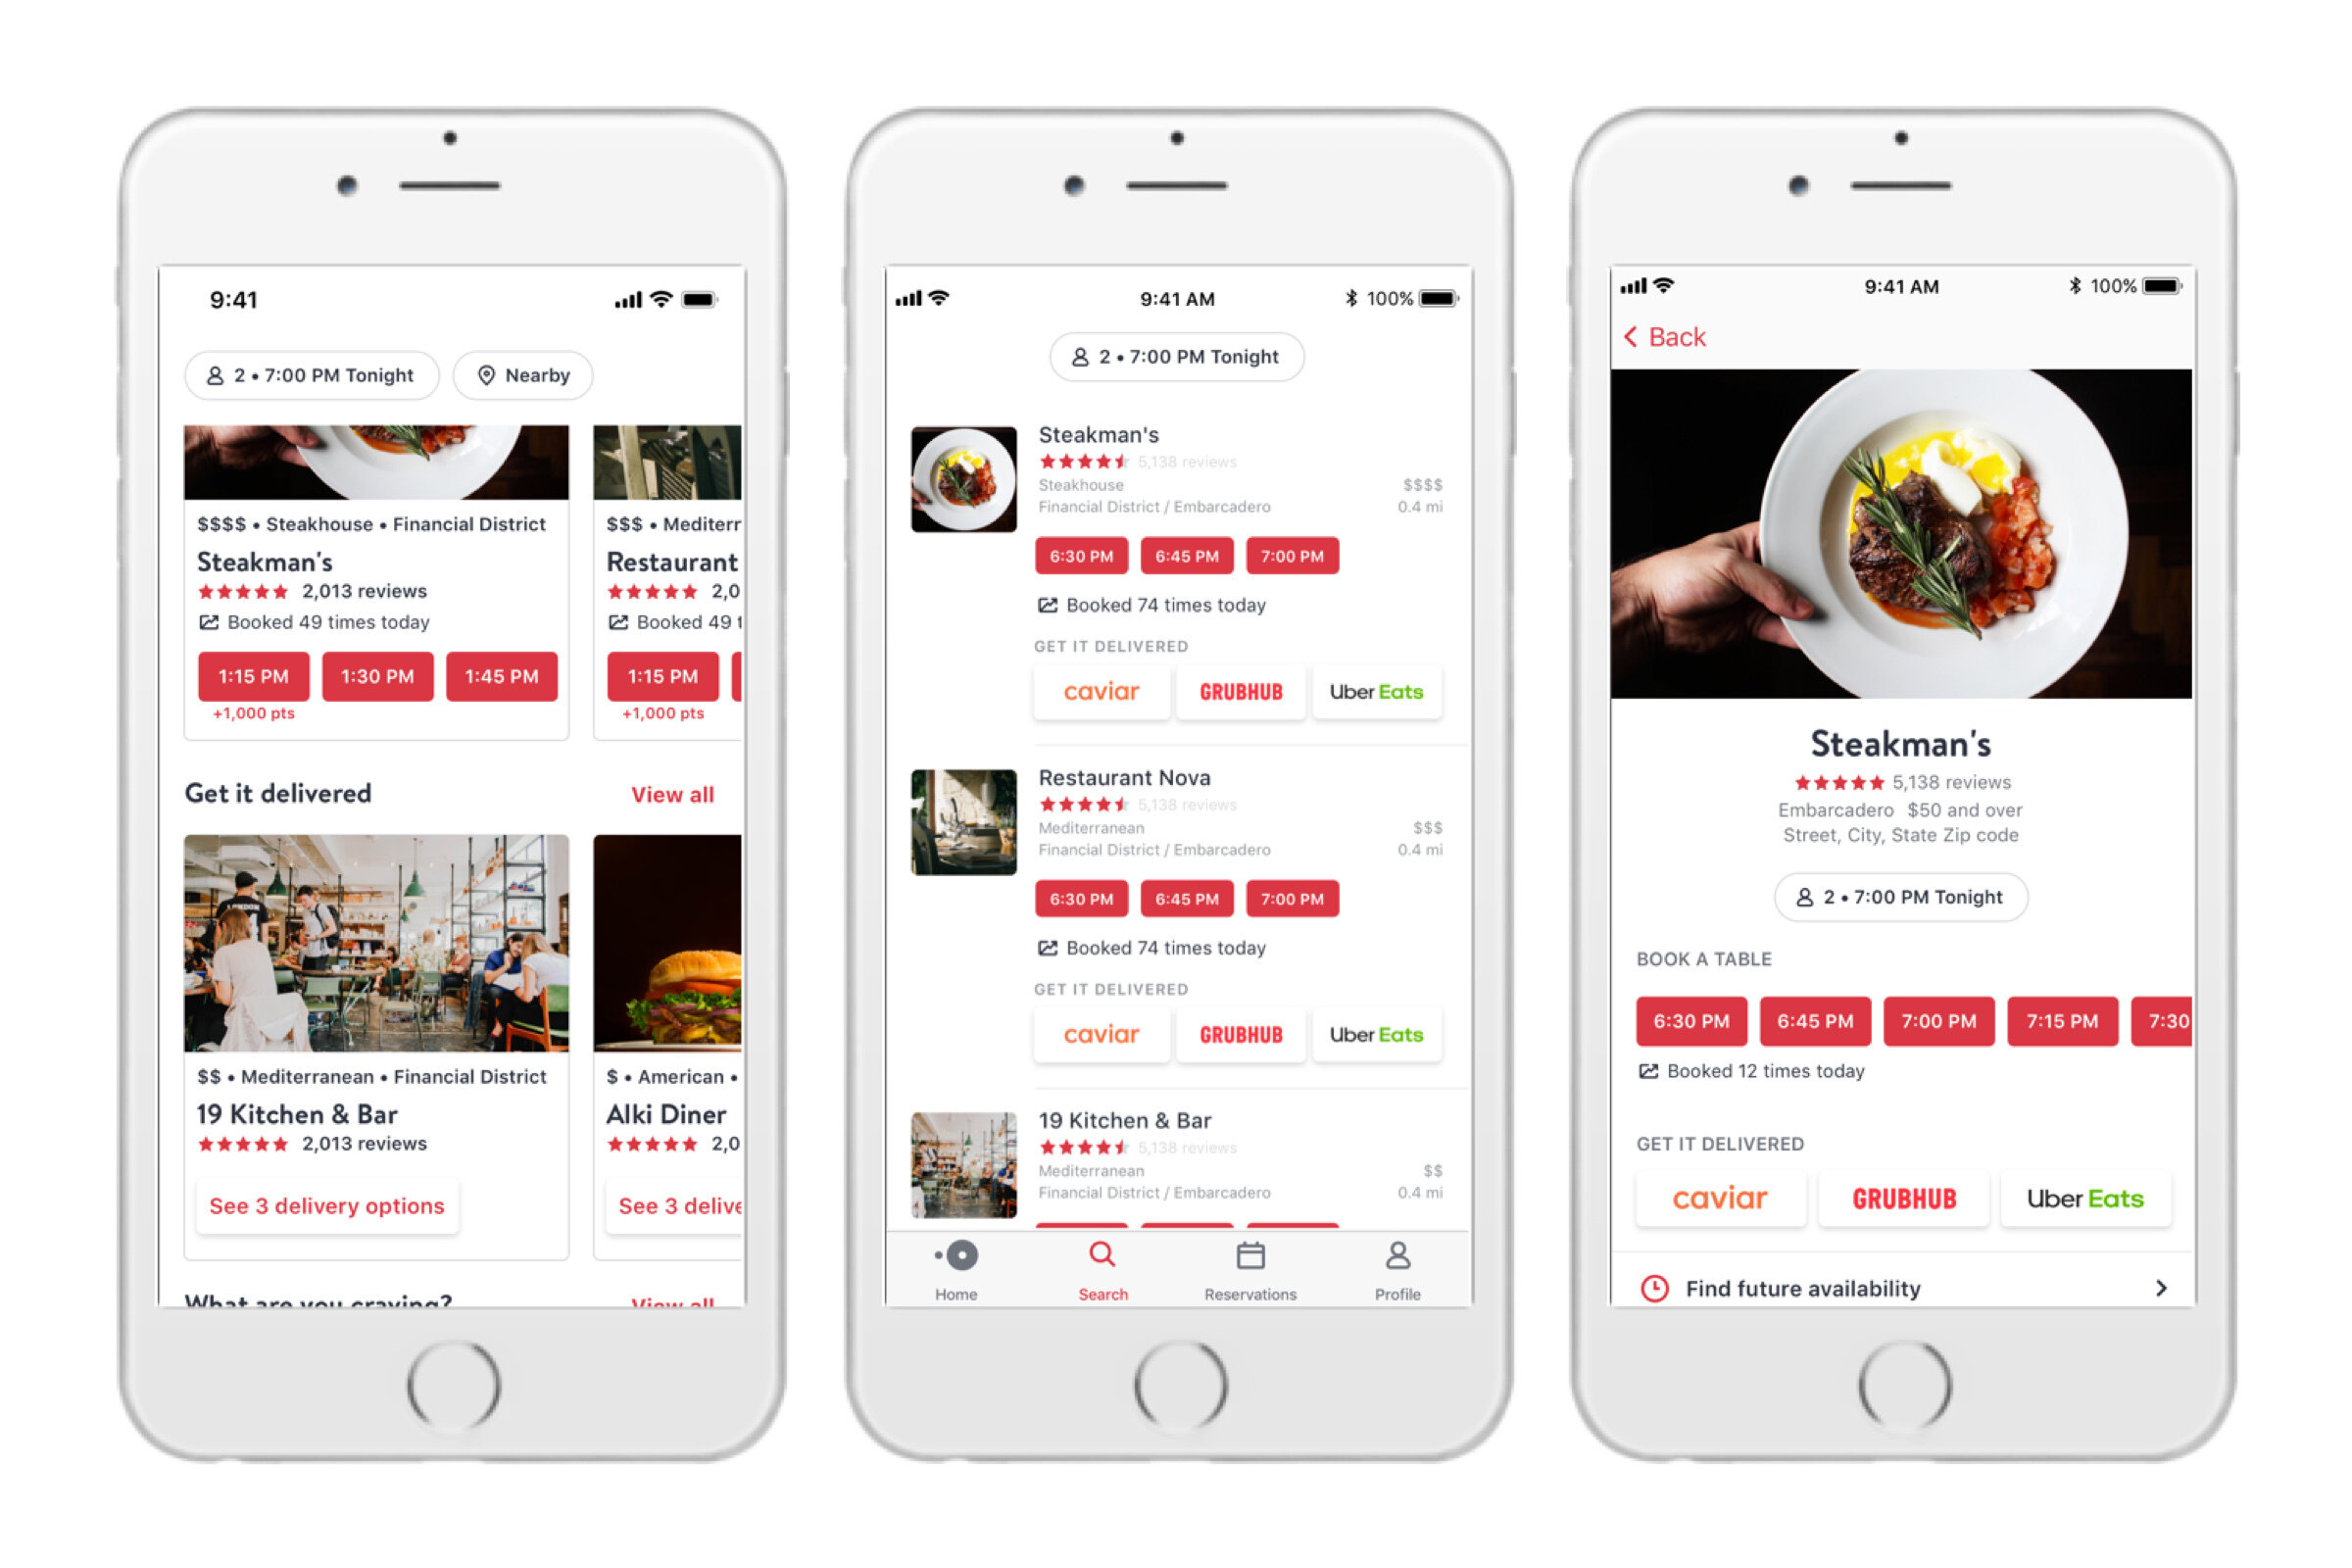 How OpenTable Makes Money: Inside Their Business Model